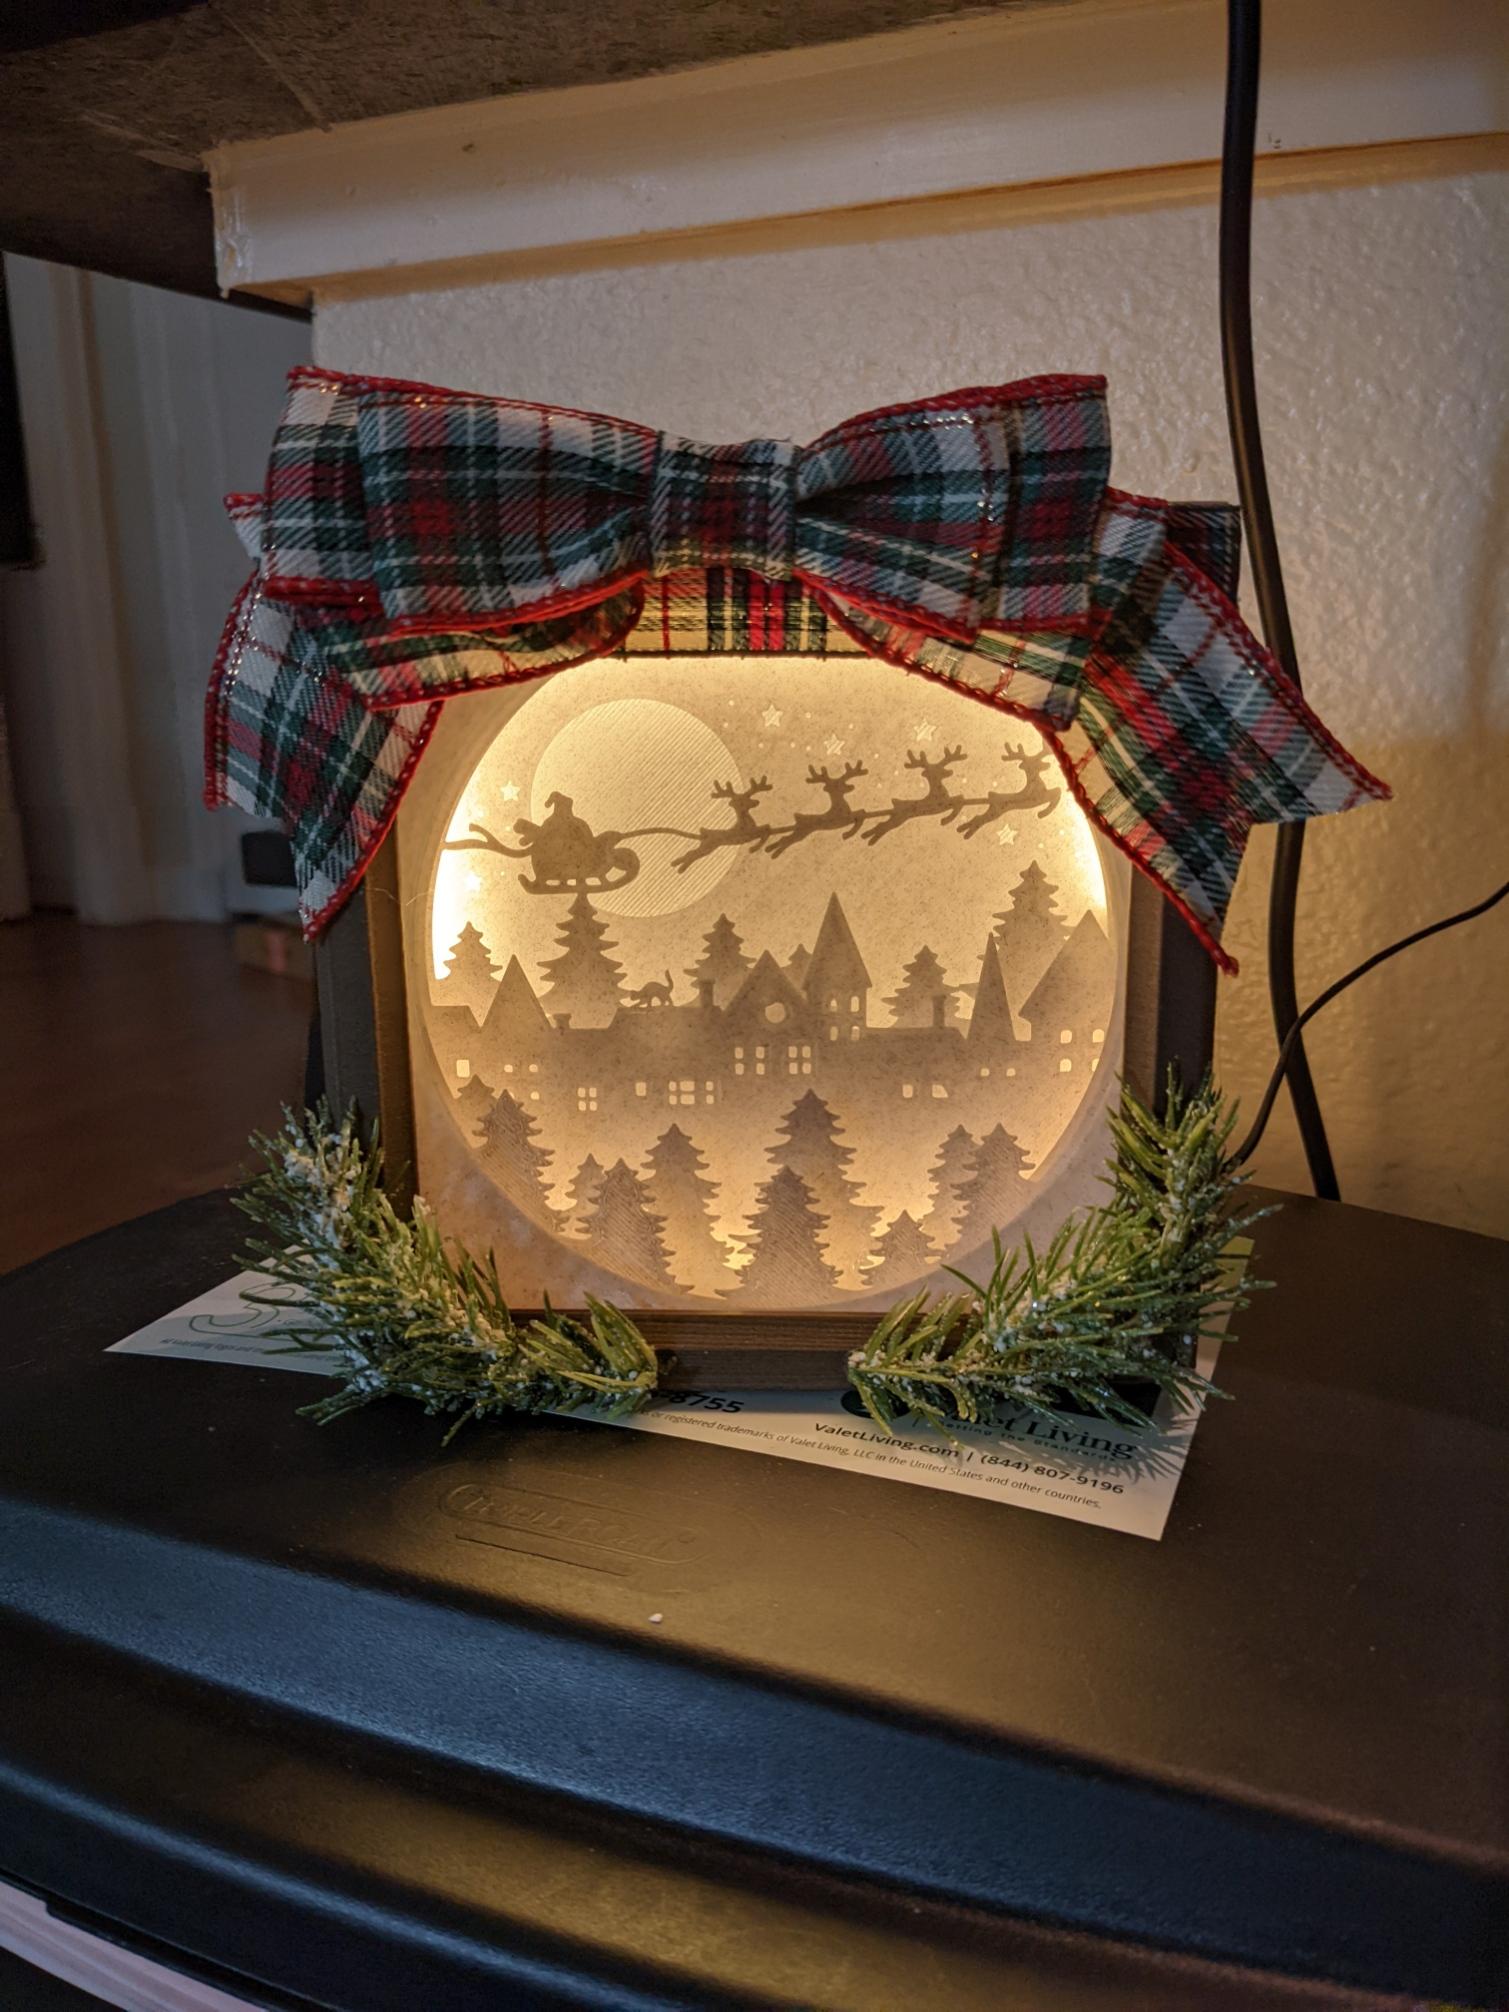 Christmas paper craft like scene lamp[stp included] - made it with proto-pasta marble HTPLA and walnut wood HTPLA. for best fit it the frames need to be extended to 104% in the Z direction to make sure the slots can take the plates - 3d model